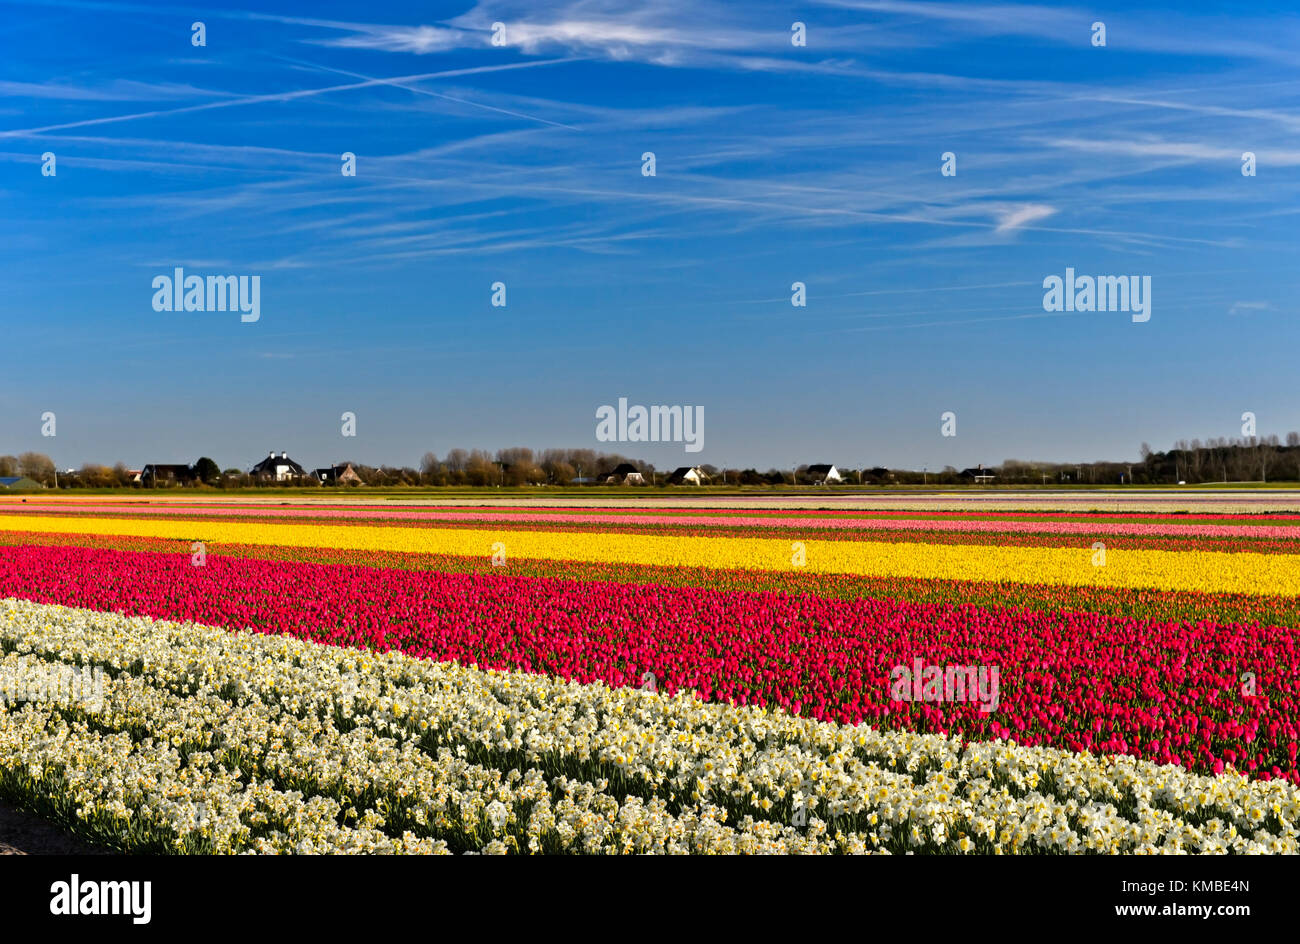 Cultivation of daffodils and tulips for the production of flower bulbs in the Bollenstreek area, Noordwijkerhout, Netherlands Stock Photo